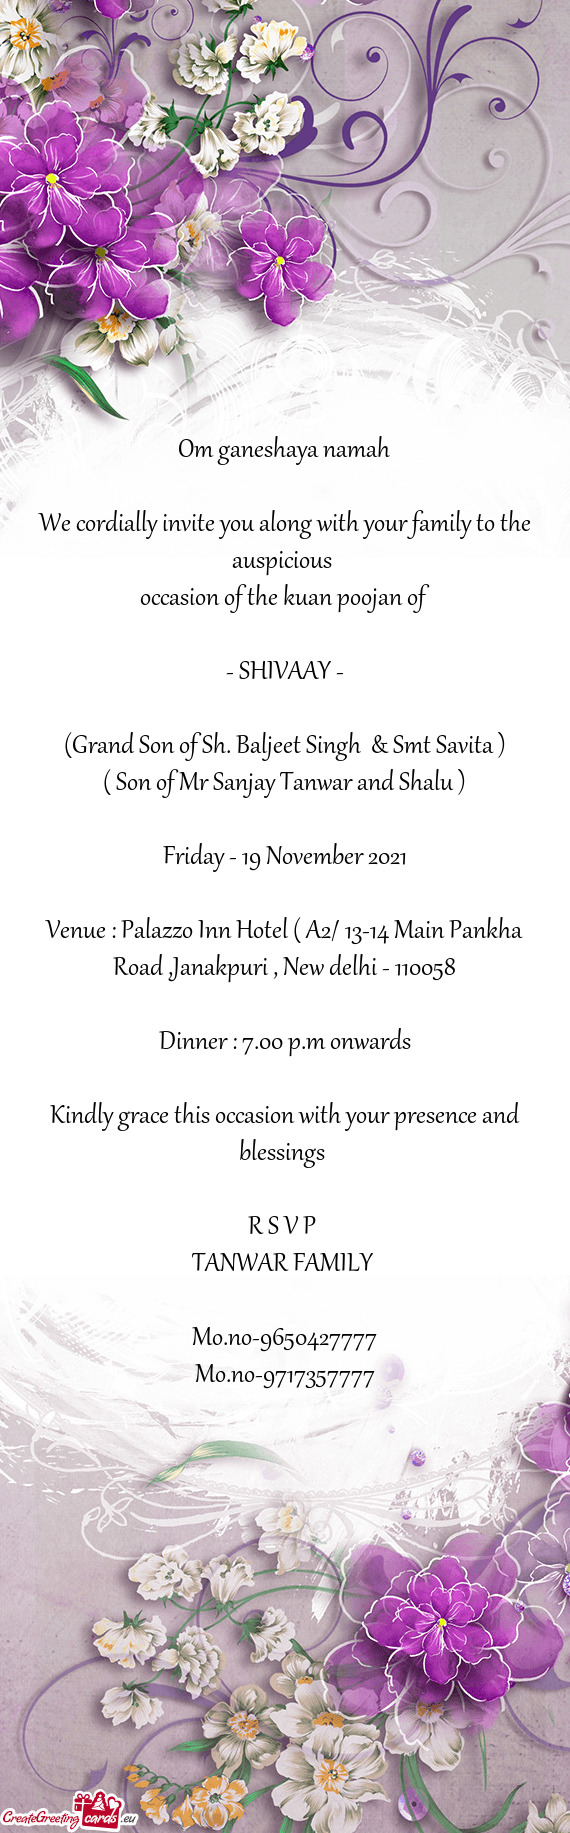 We cordially invite you along with your family to the auspicious